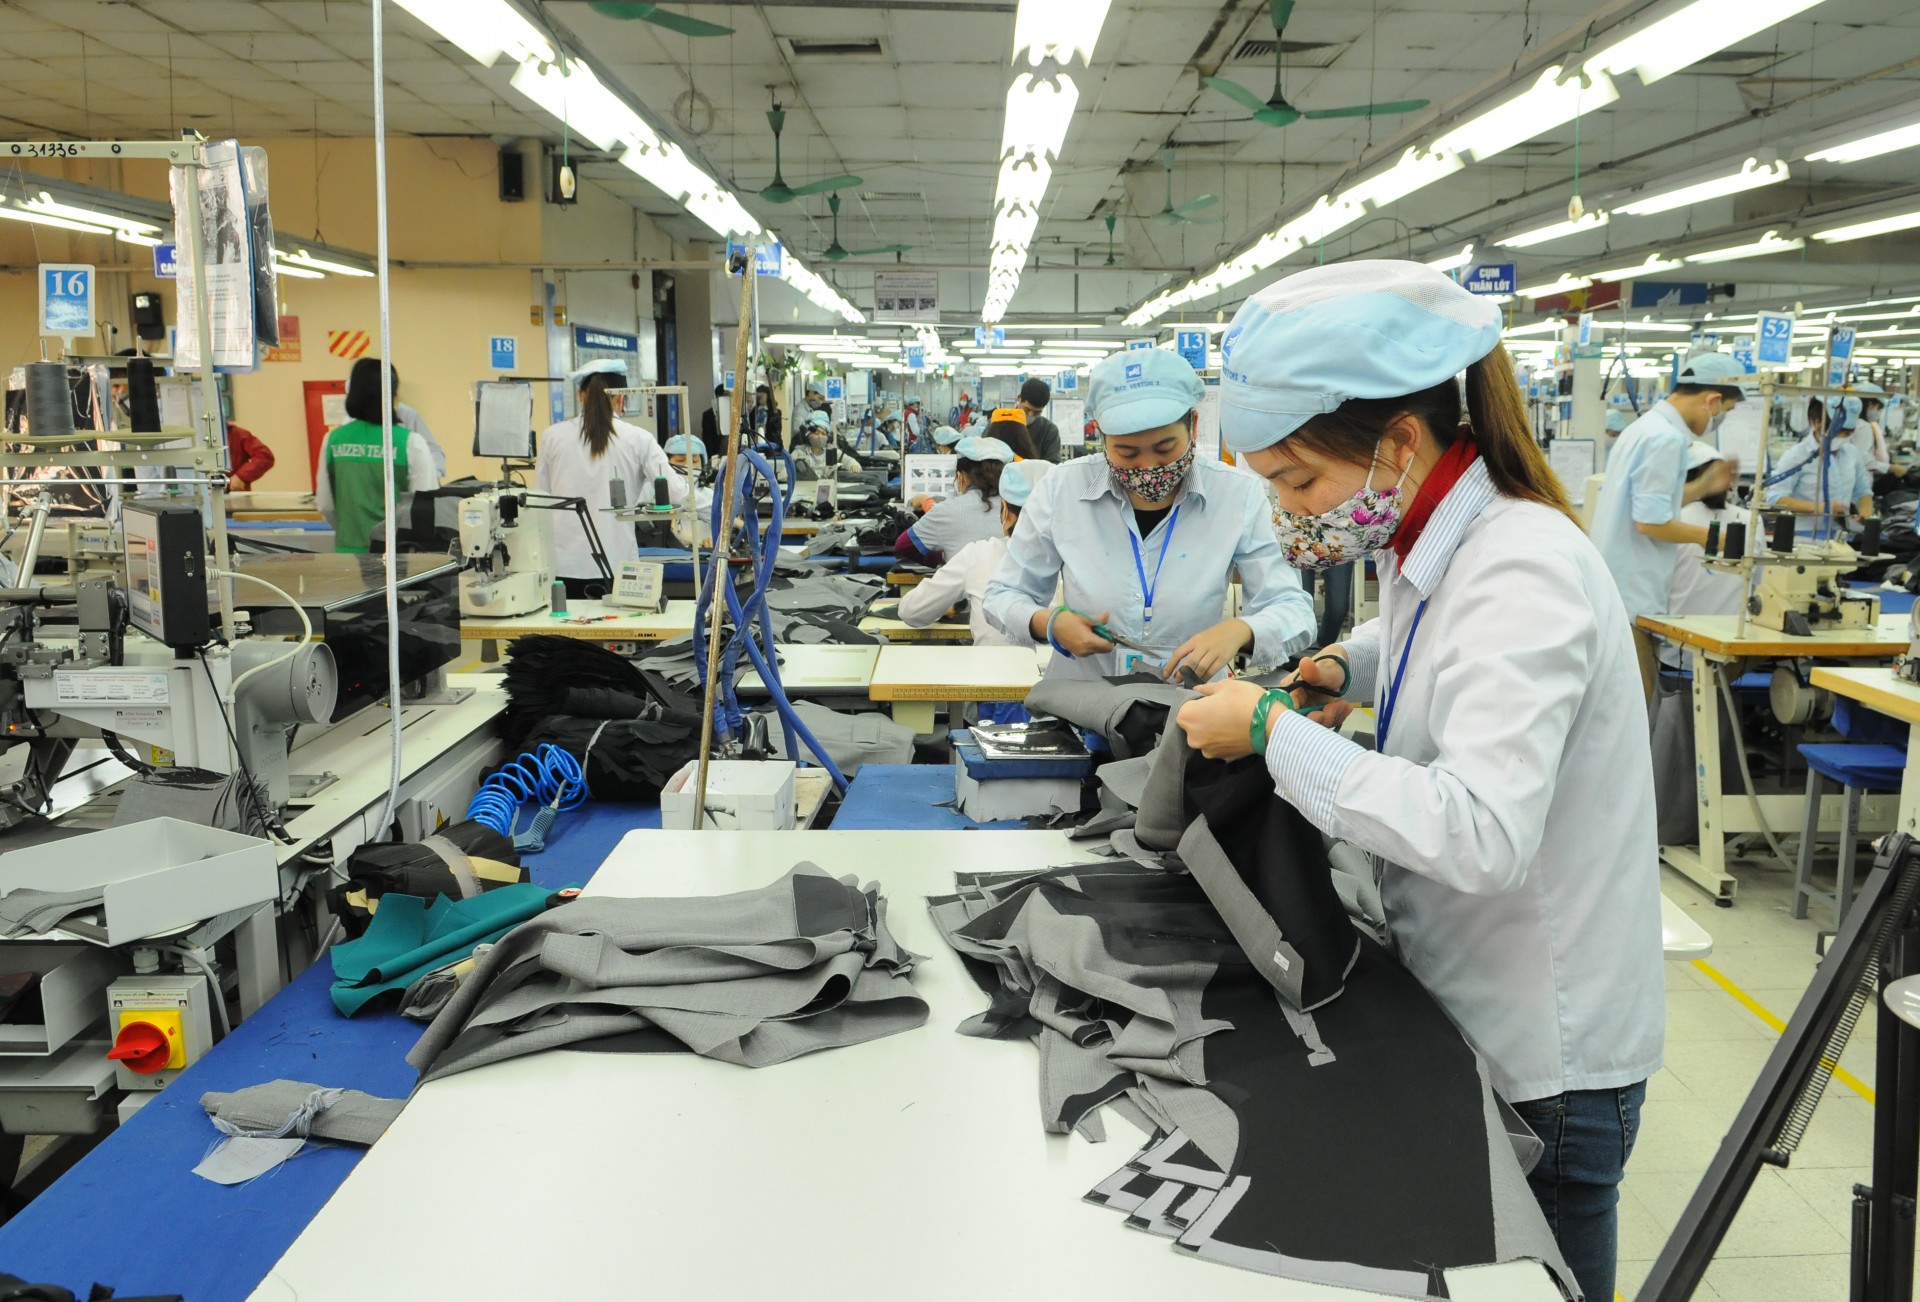 Vietnam exported textiles and garments worth US$220 million to China in the first quarter of this year